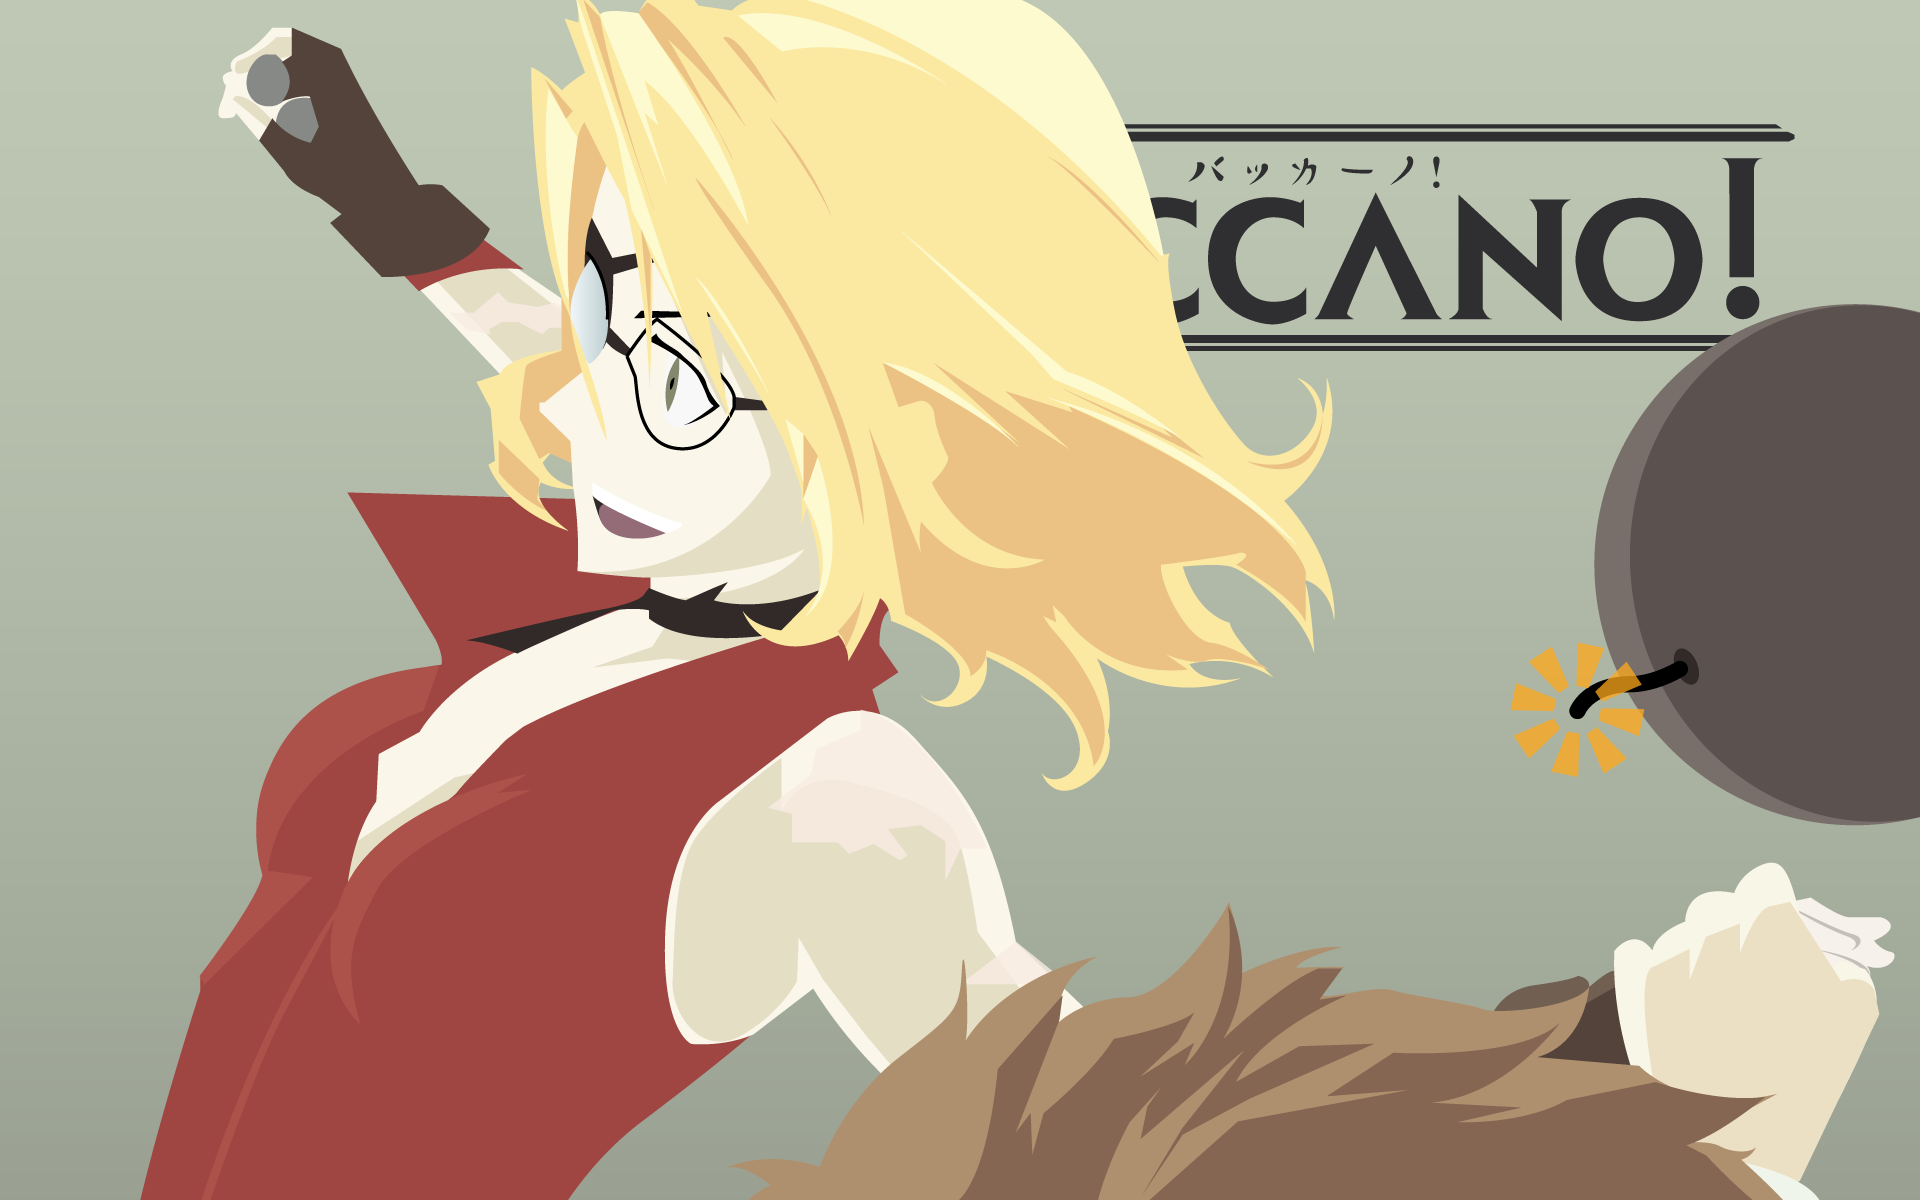 Anime 1920x1200 Baccano! anime anime girls blonde eyepatches glasses bombs looking away simple background